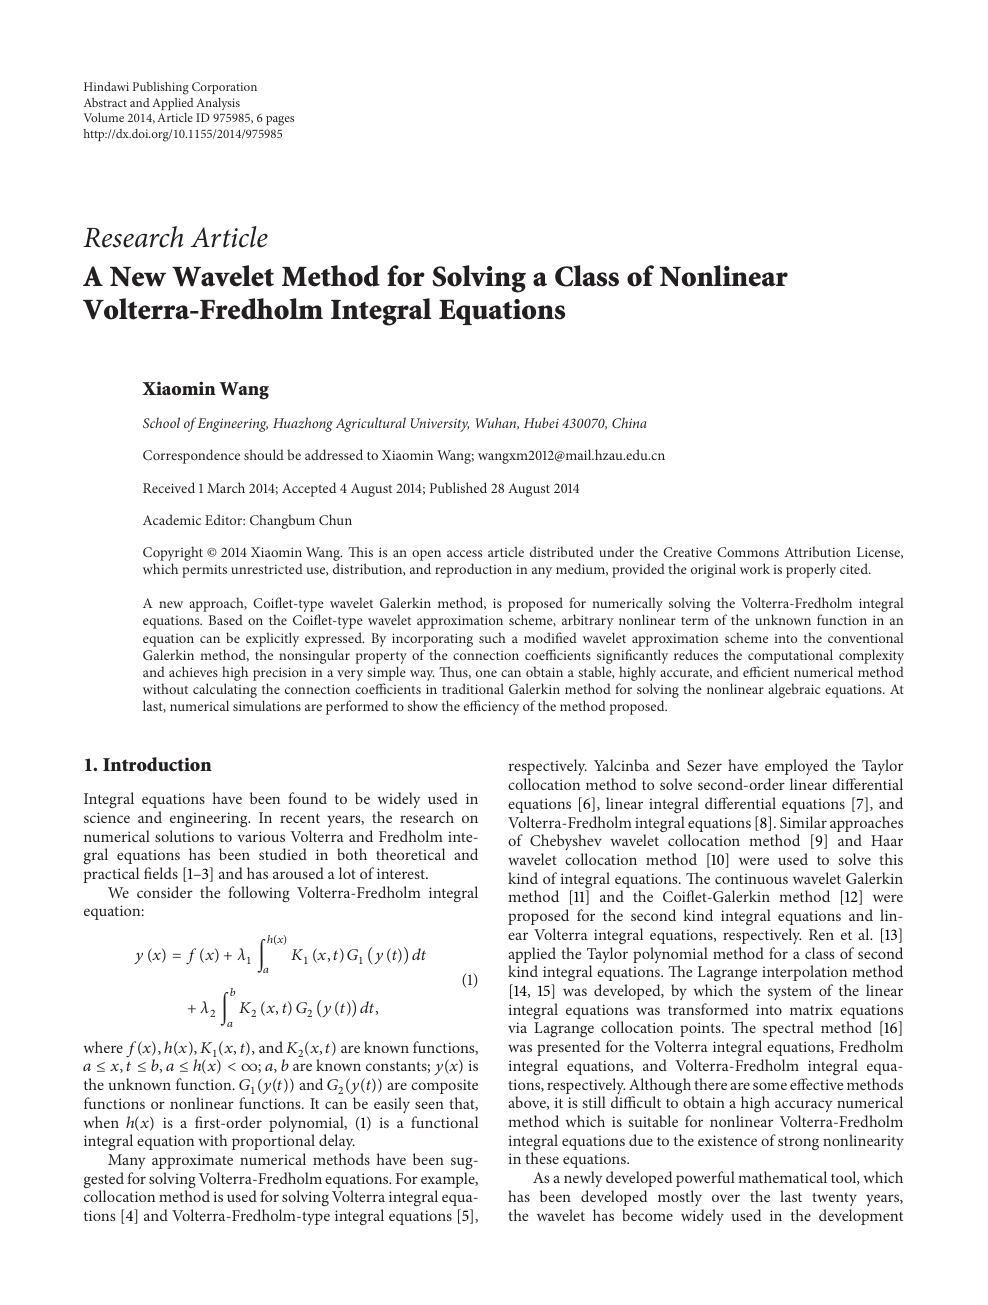 A New Wavelet Method For Solving A Class Of Nonlinear Volterra Fredholm Integral Equations Topic Of Research Paper In Mathematics Download Scholarly Article Pdf And Read For Free On Cyberleninka Open Science